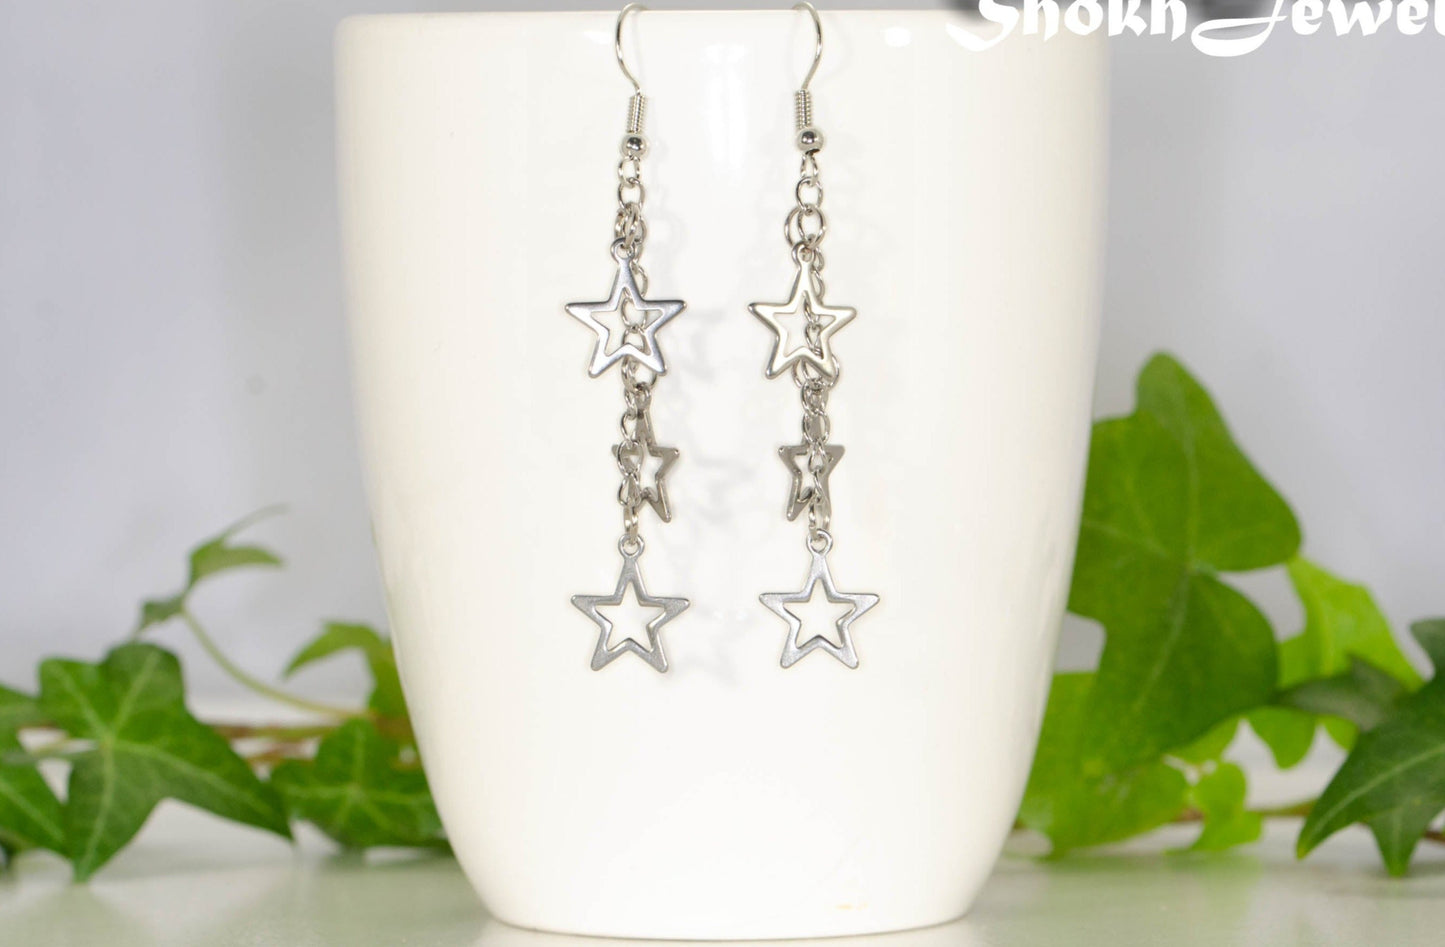 Stainless steel chain and star earrings on a coffee mug